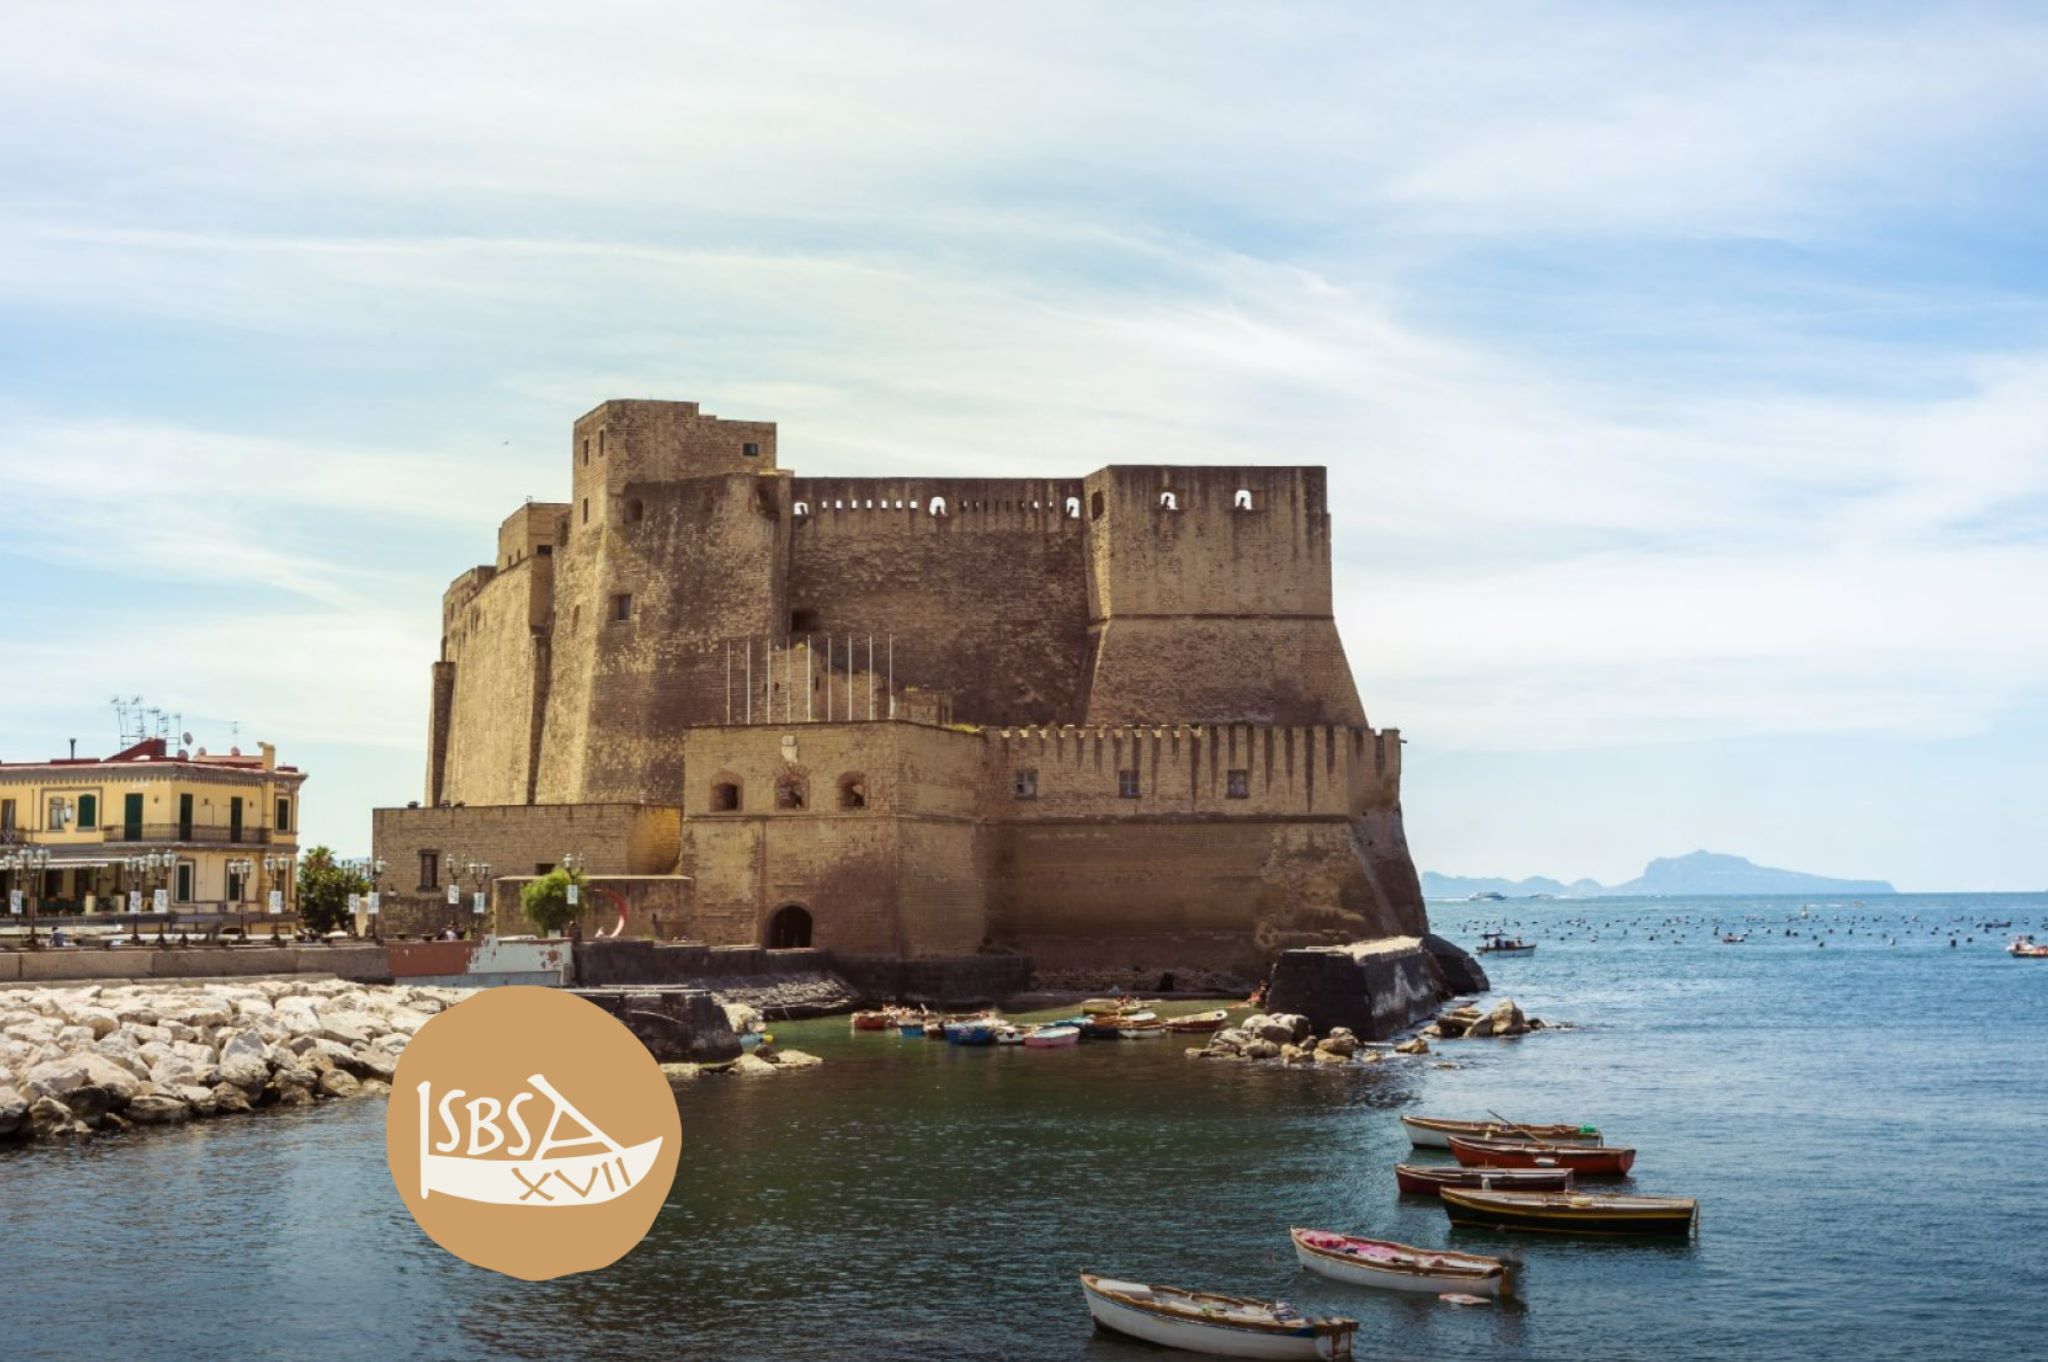 National Superintendency for the Underwater Cultural Heritage, ISMEO— The International Association for Mediterranean and Oriental Studies, University of Naples “L’Orientale”